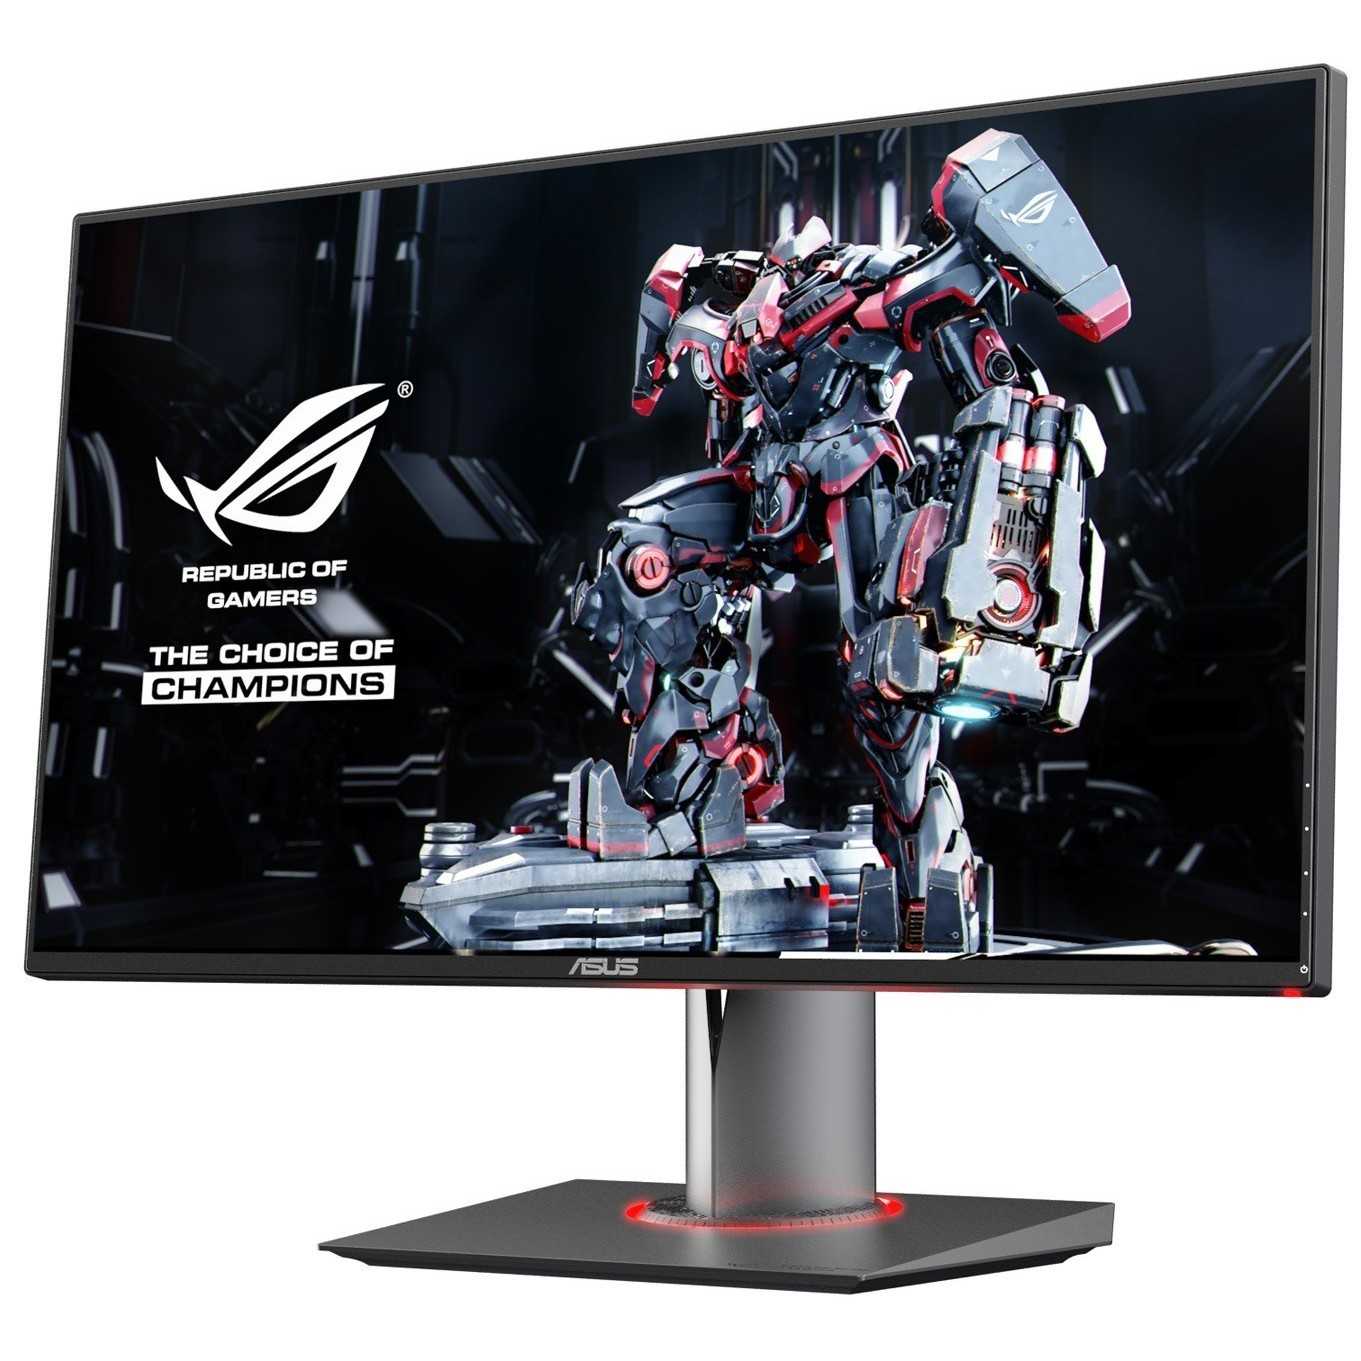 Asus rog swift pg279q review - my buying guide